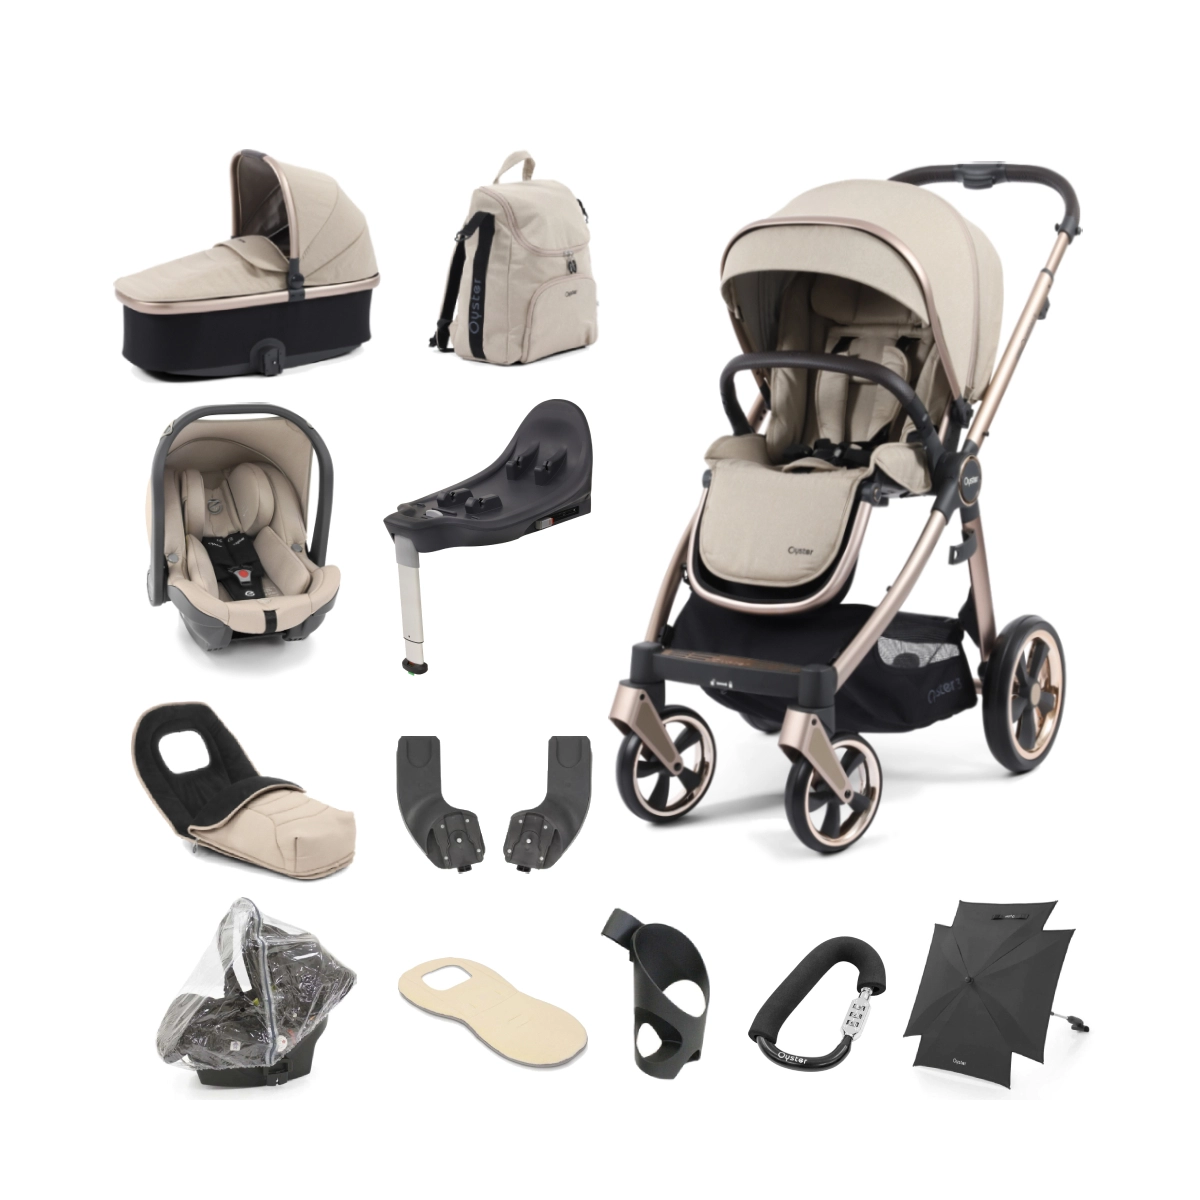 BabyStyle Oyster 3 Champagne Chassis 12 Piece Ultimate Travel System